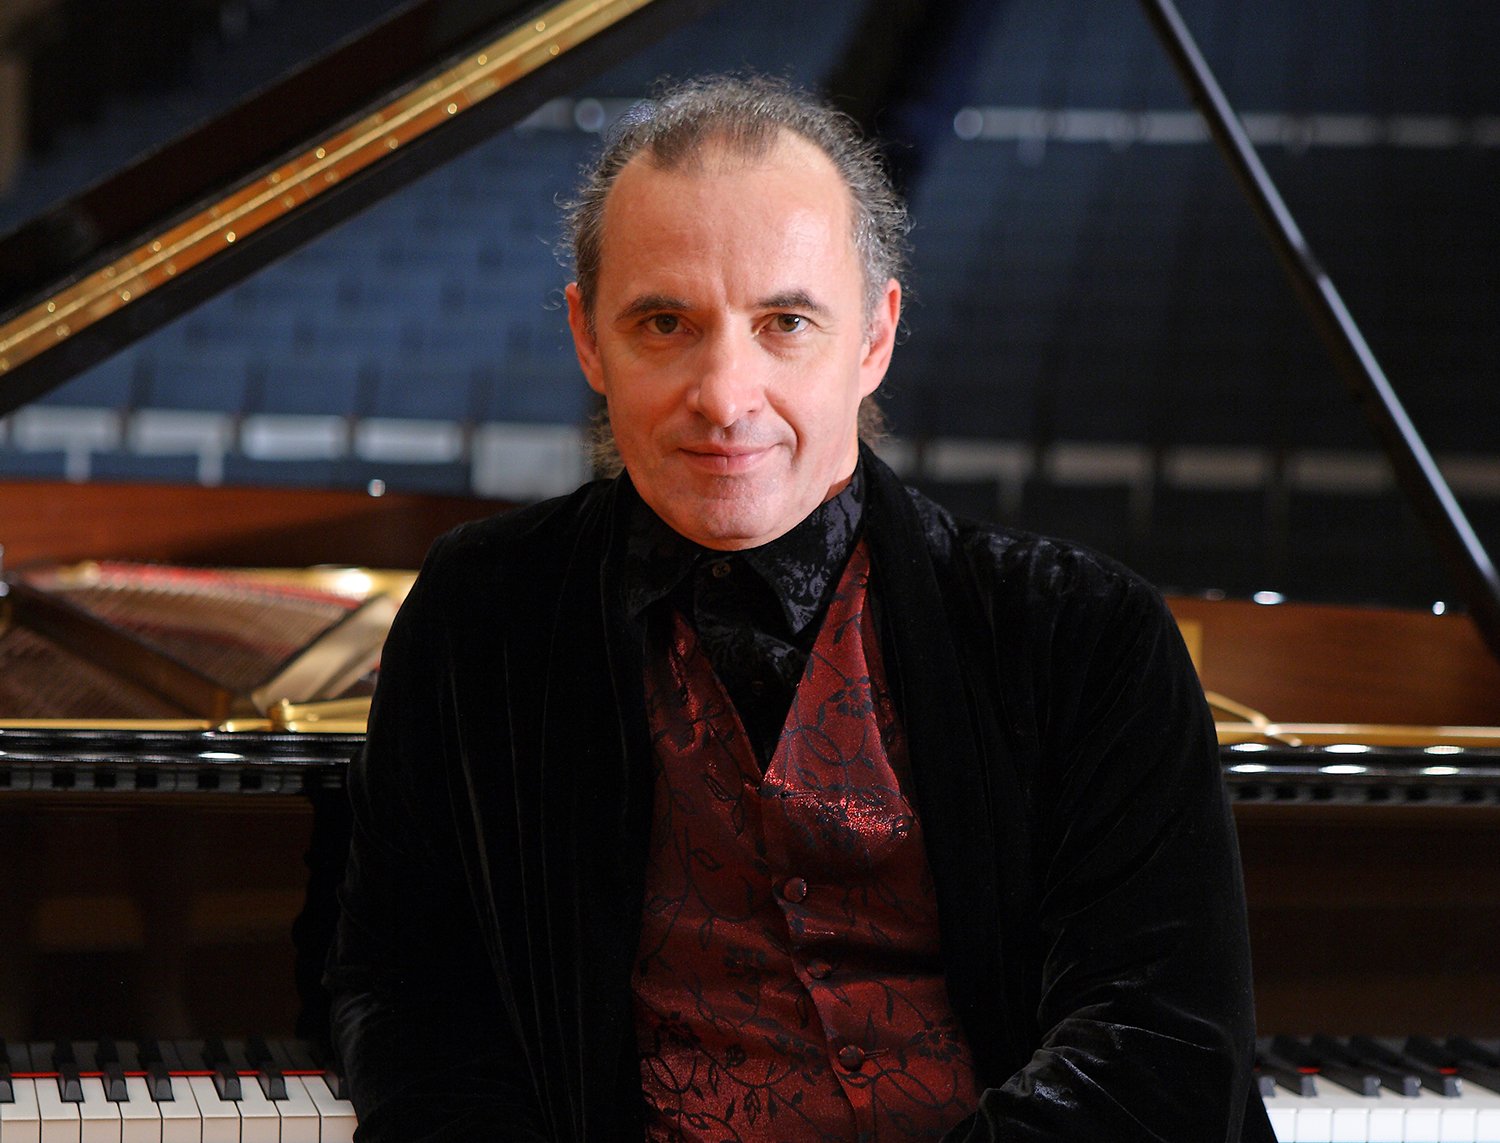    Kemal Gekic: In Concert and Clinician   